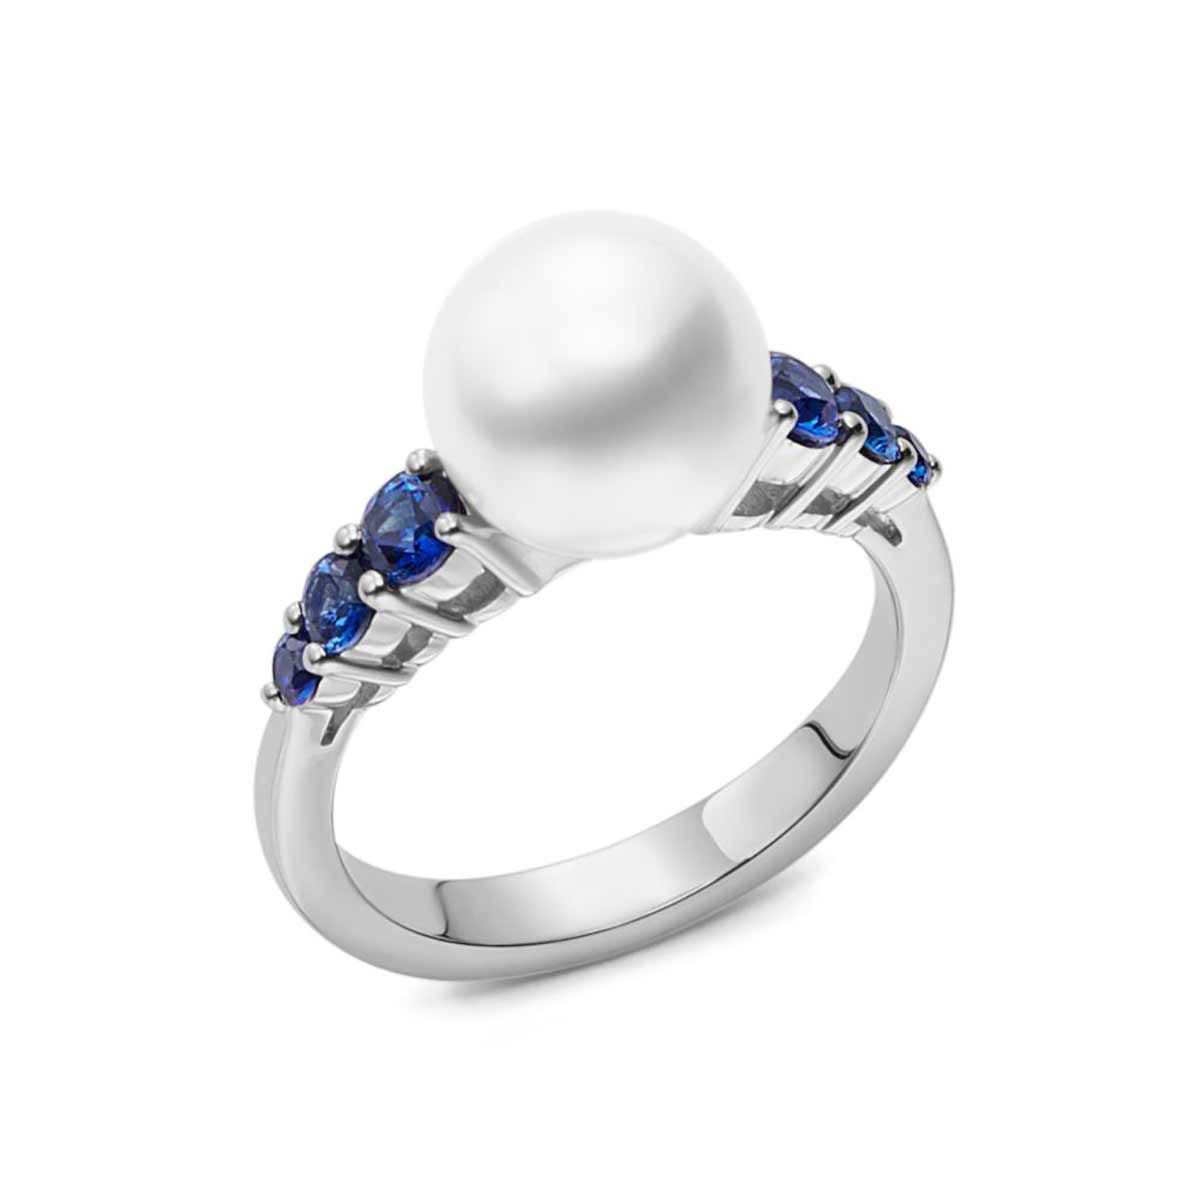 Mikimoto South Sea Pearl and Blue Sapphire Ring